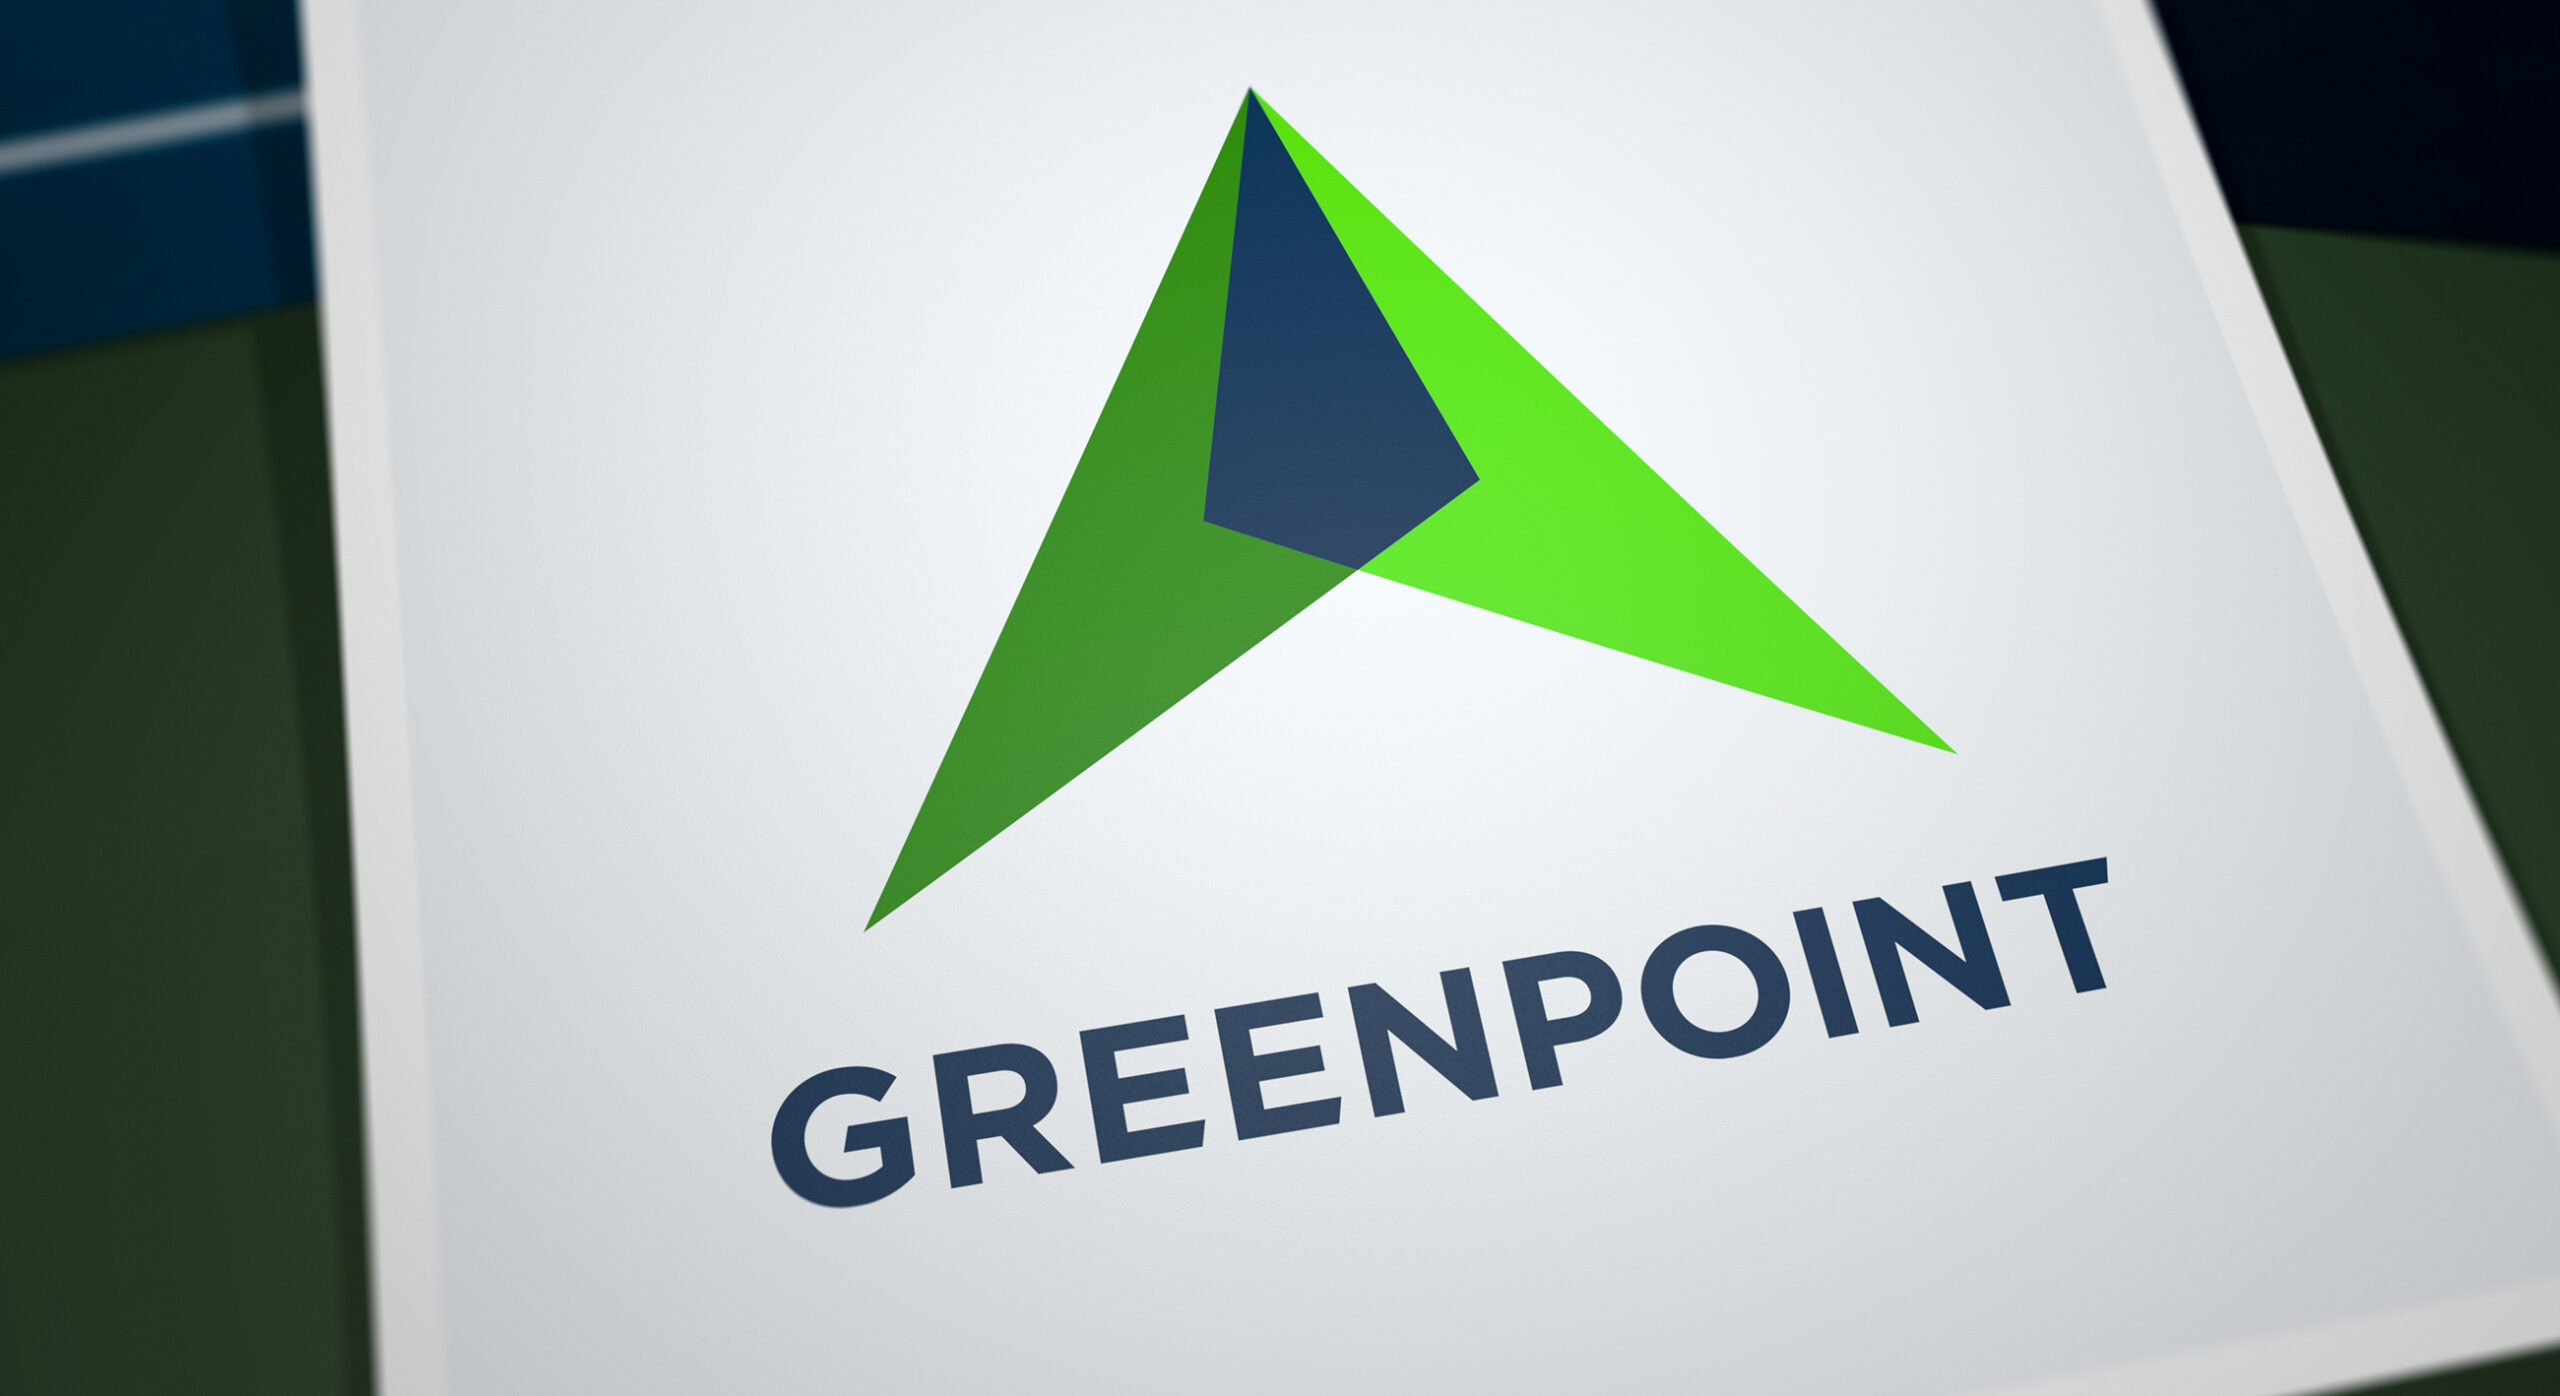 The logo combines a mountain peak with an upward directional arrow rendered as two overlapping planes.